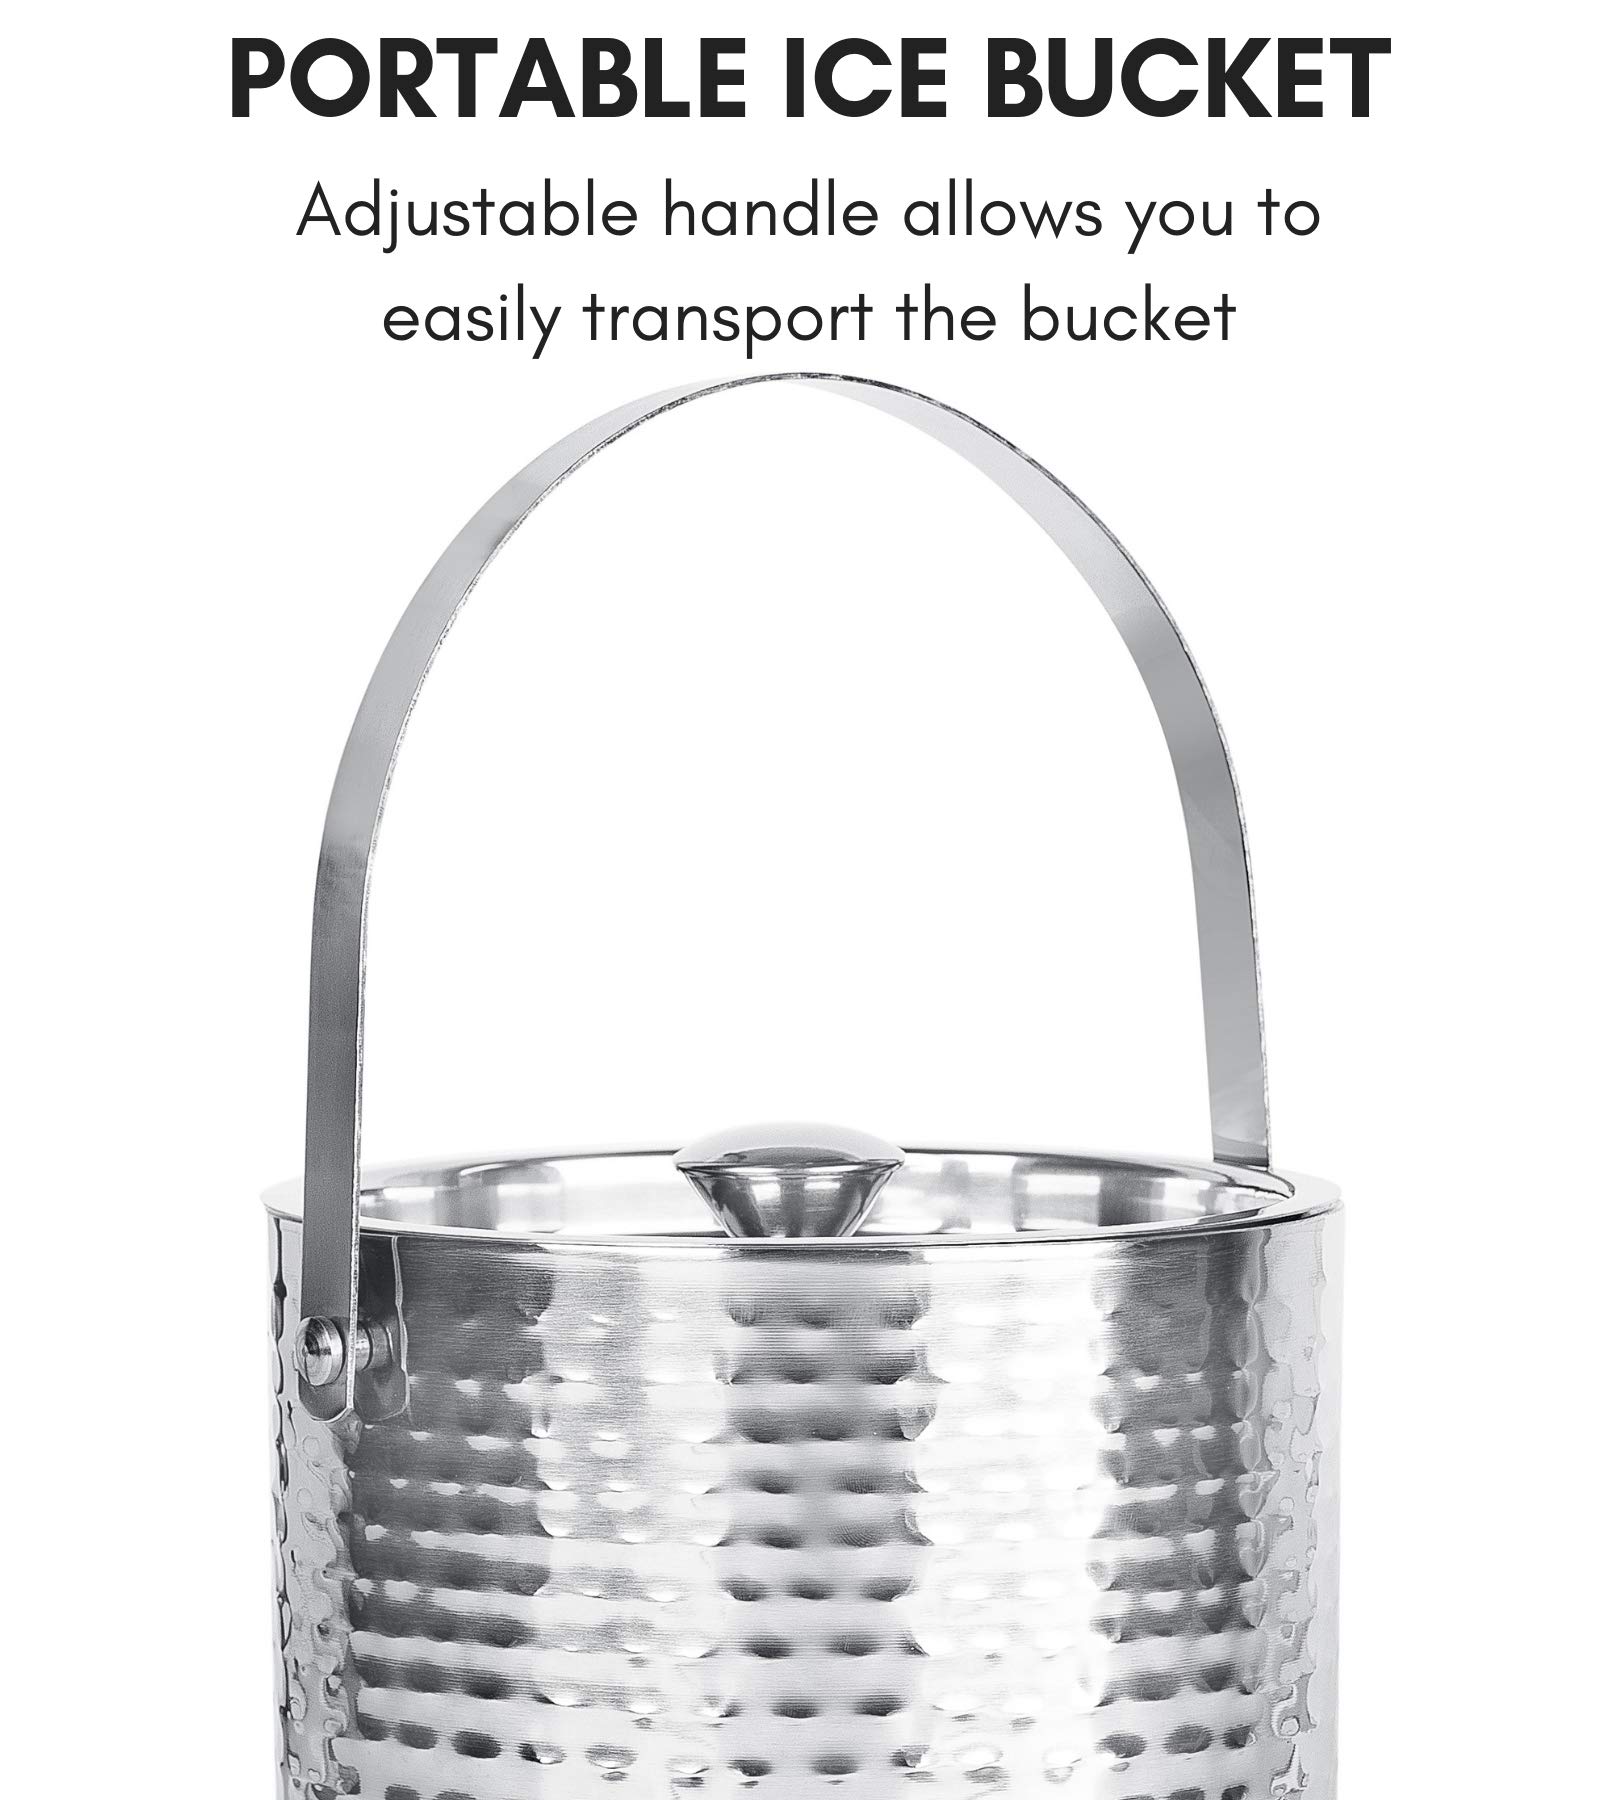 BirdRock Home Ice Bucket with Scoop & Lid - 2.8 Liter Hammered 18/8 Stainless Steel Container for Bar - Double Wall Insulated Bucket with Carrying Handle - Great for Parties - (Silver)